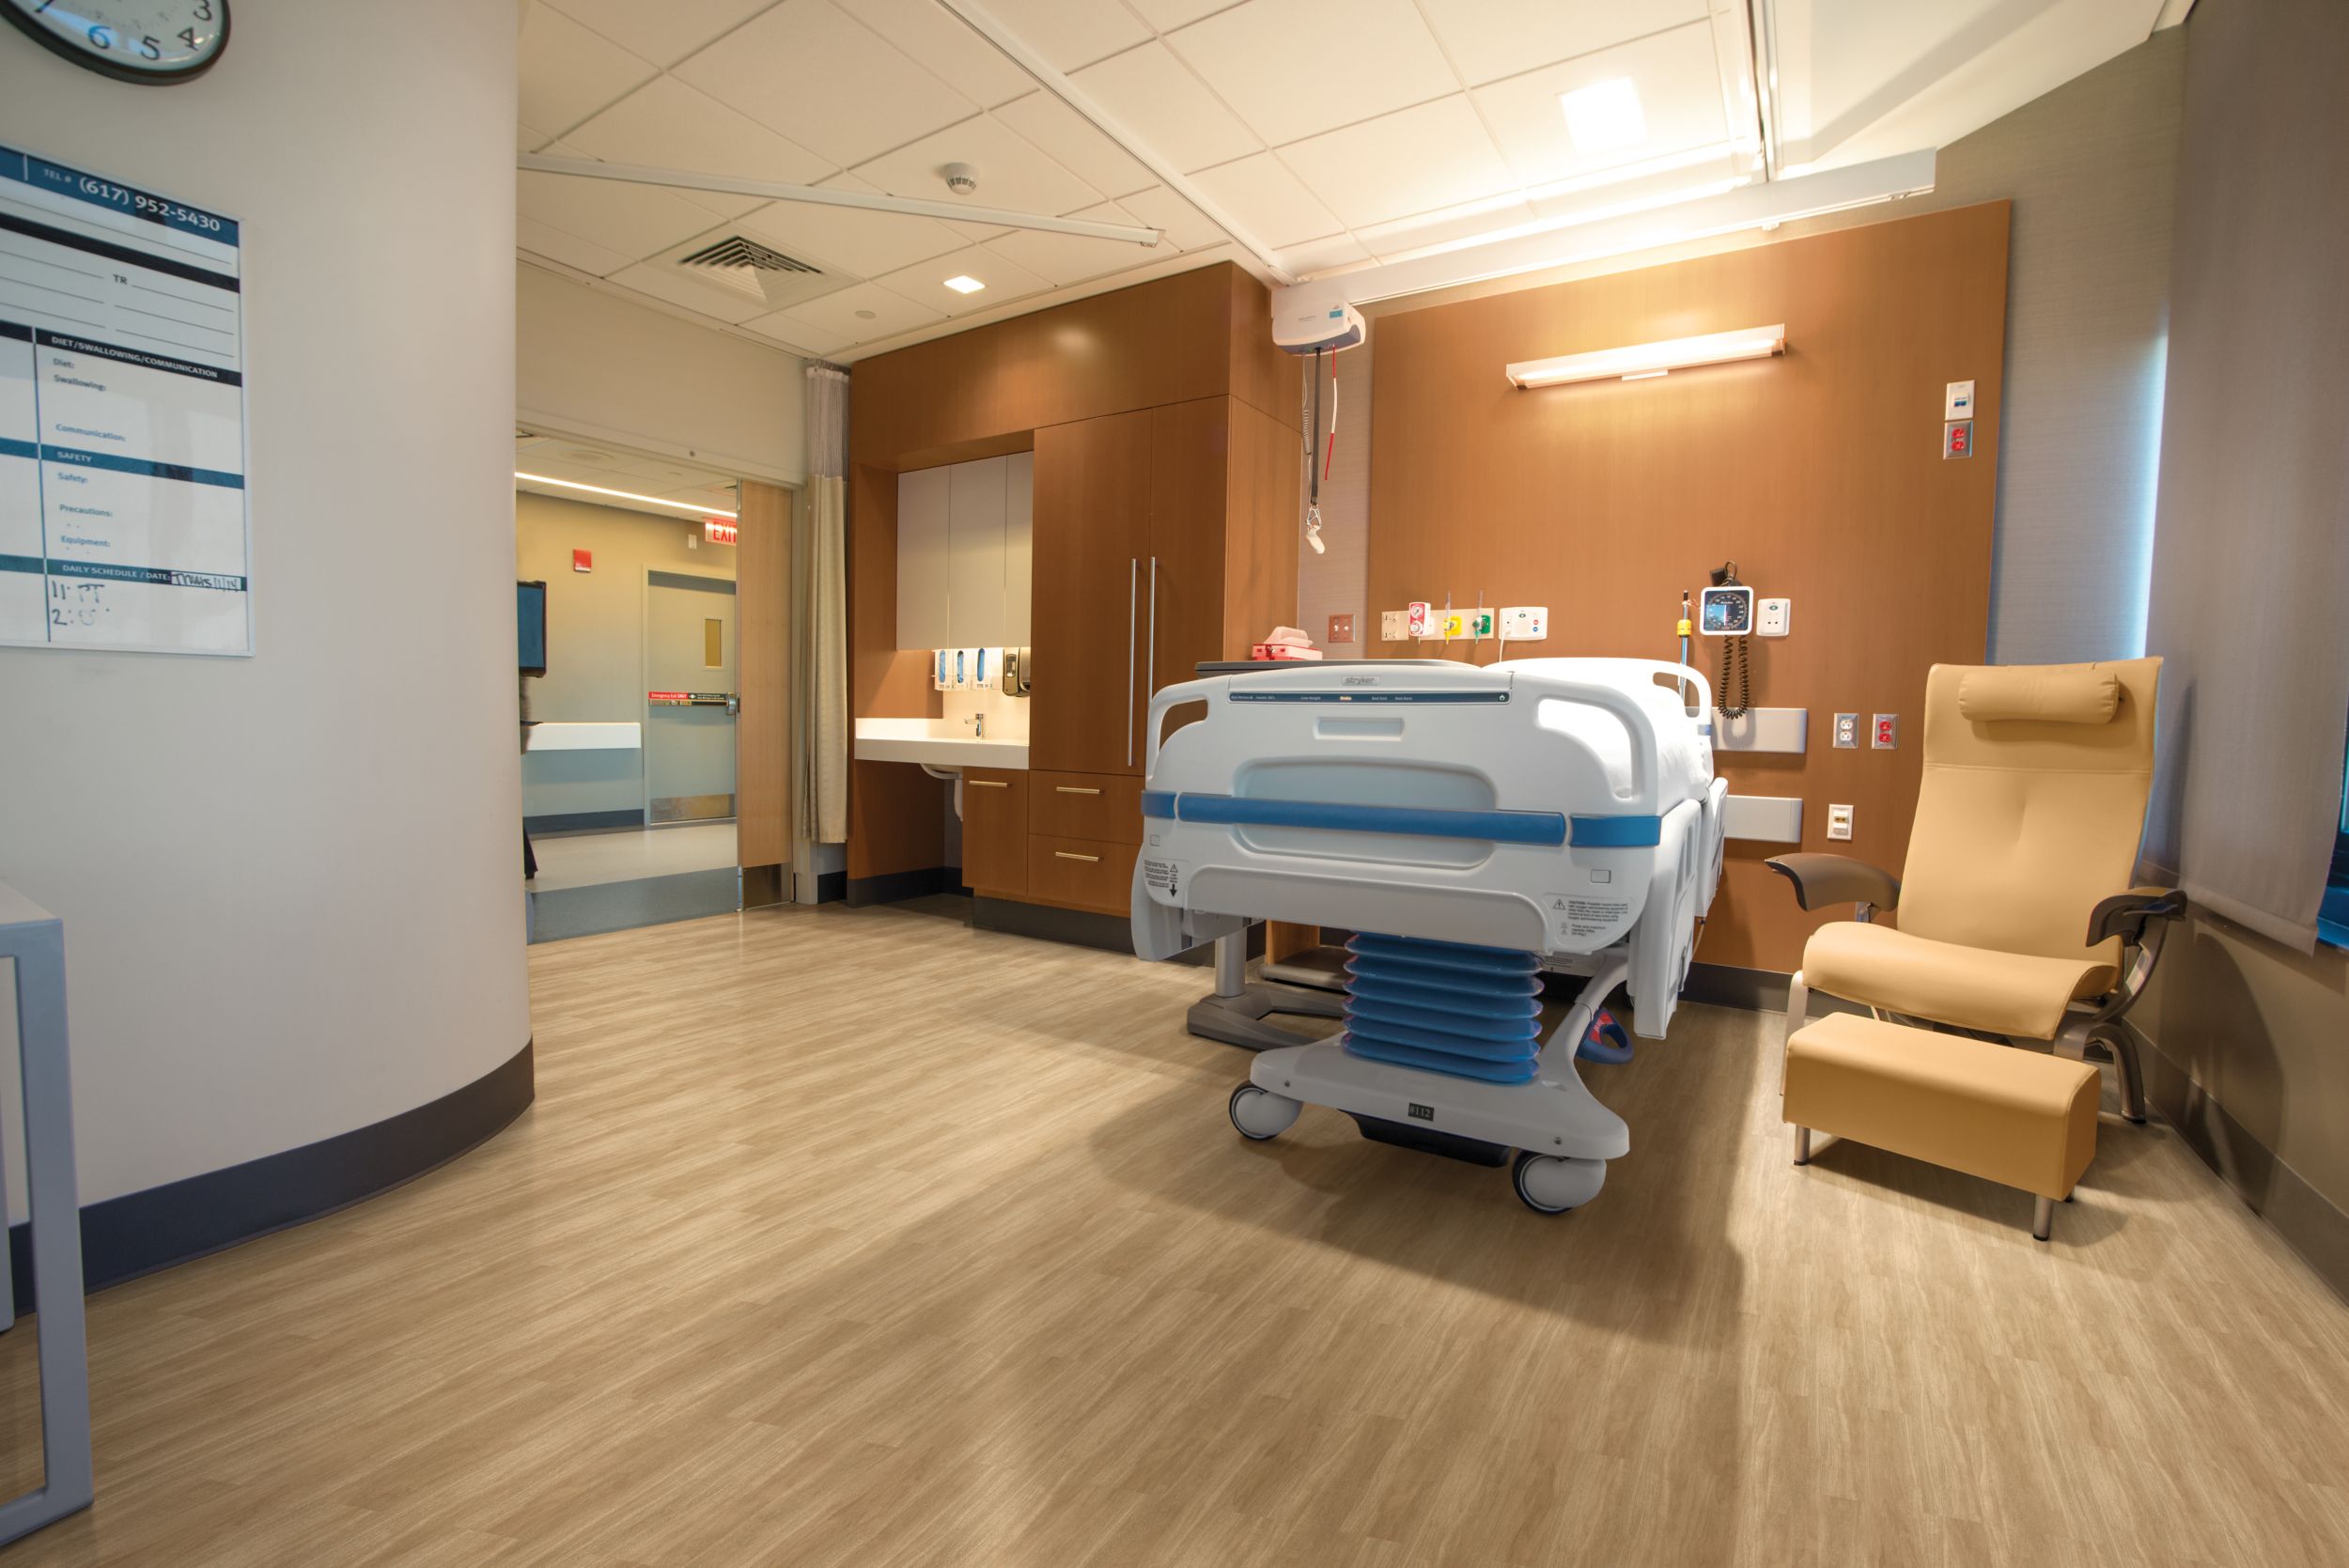 Interface Criterion Classic Woodgrains LVT in patient room with hospital bed and chair numéro d’image 1